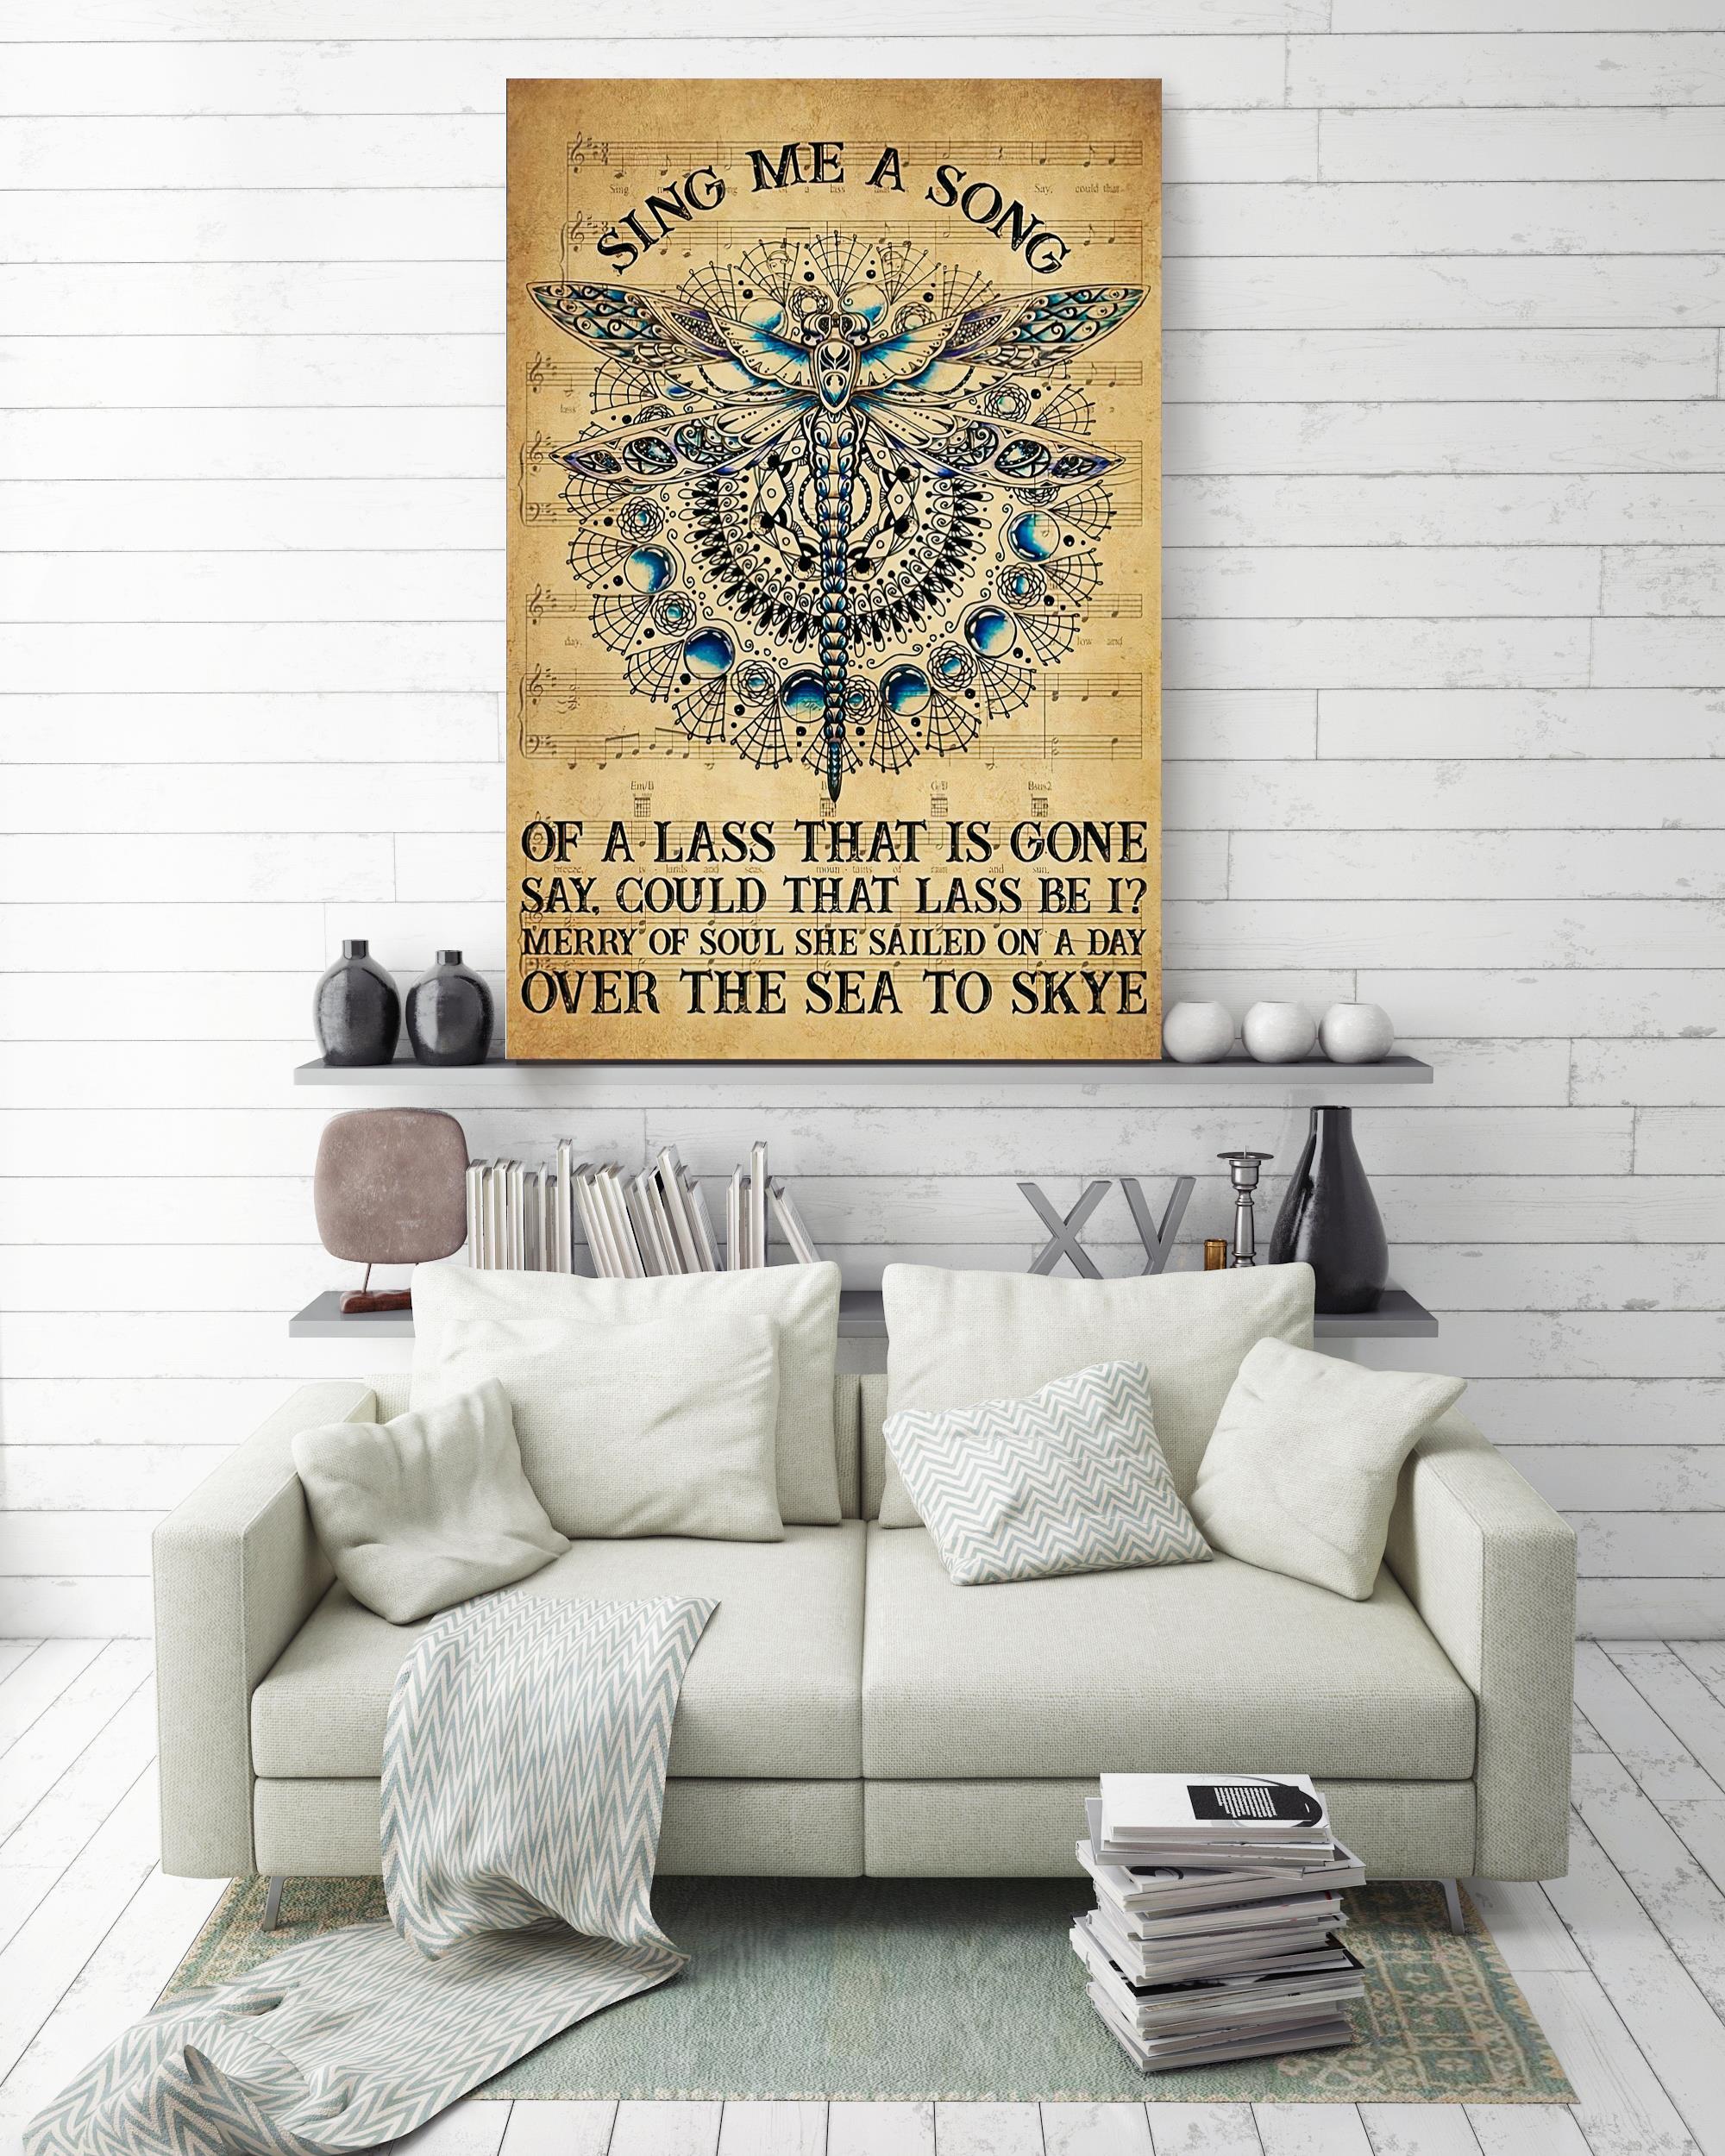 Sing Me A Song Lyrics Song Vintage Wall Art For Home Decor Housewarming ...